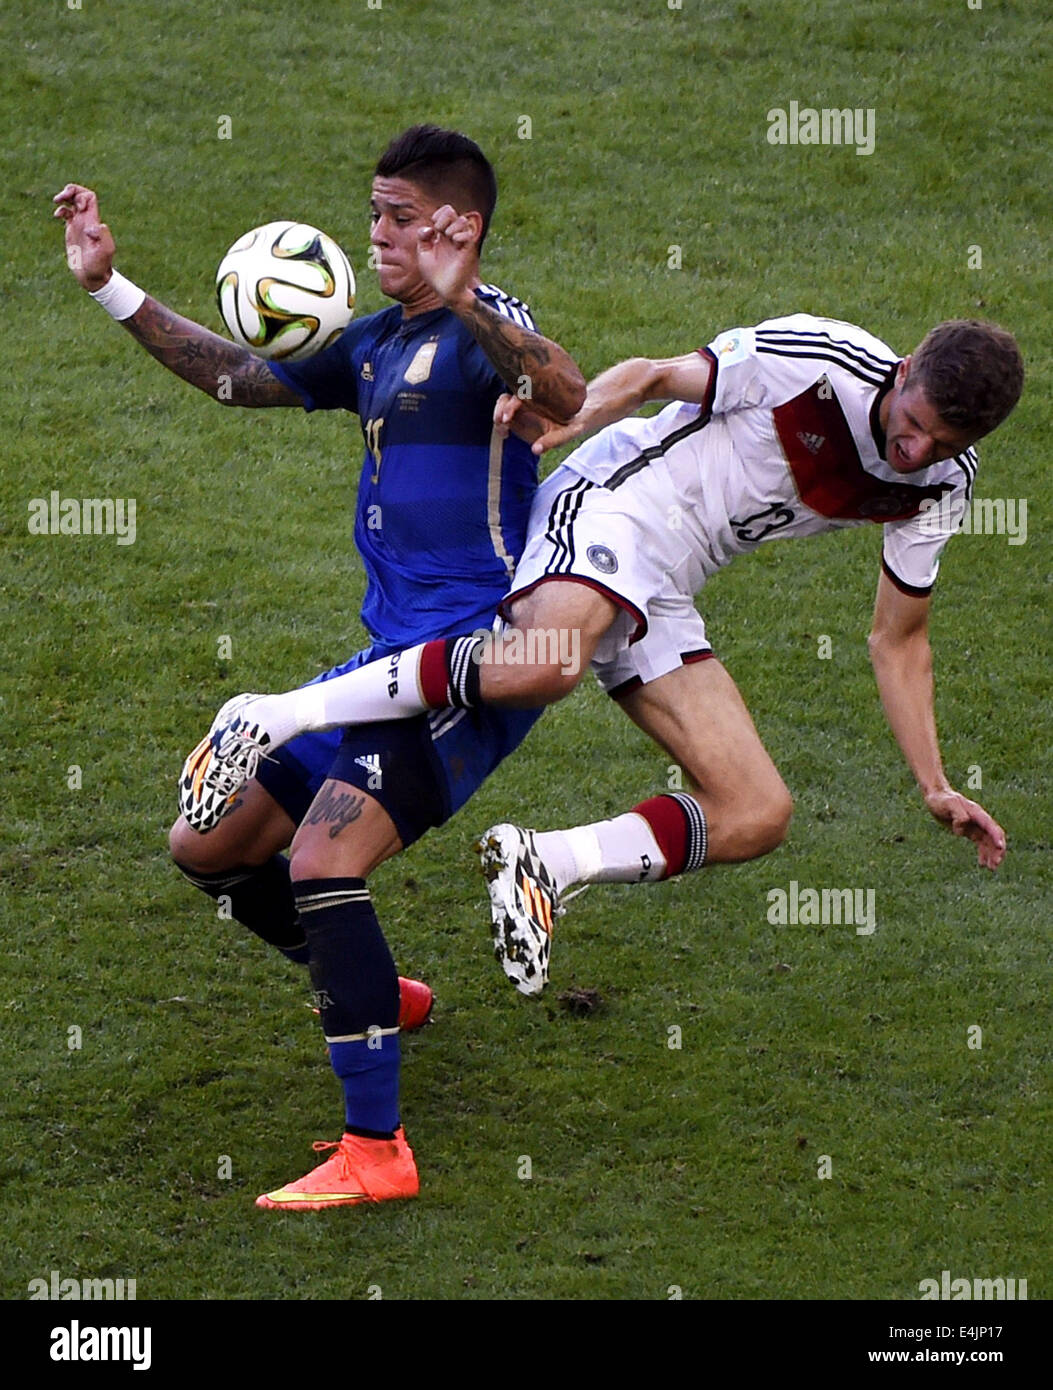 Rio De Janeiro, Brazil. 13th July, 2014. Germany's Thomas Muller vies with Argentina's Marcos Rojo during the final match between Germany and Argentina of 2014 FIFA World Cup at the Estadio do Maracana Stadium in Rio de Janeiro, Brazil, on July 13, 2014. Credit:  Lui Siu Wai/Xinhua/Alamy Live News Stock Photo